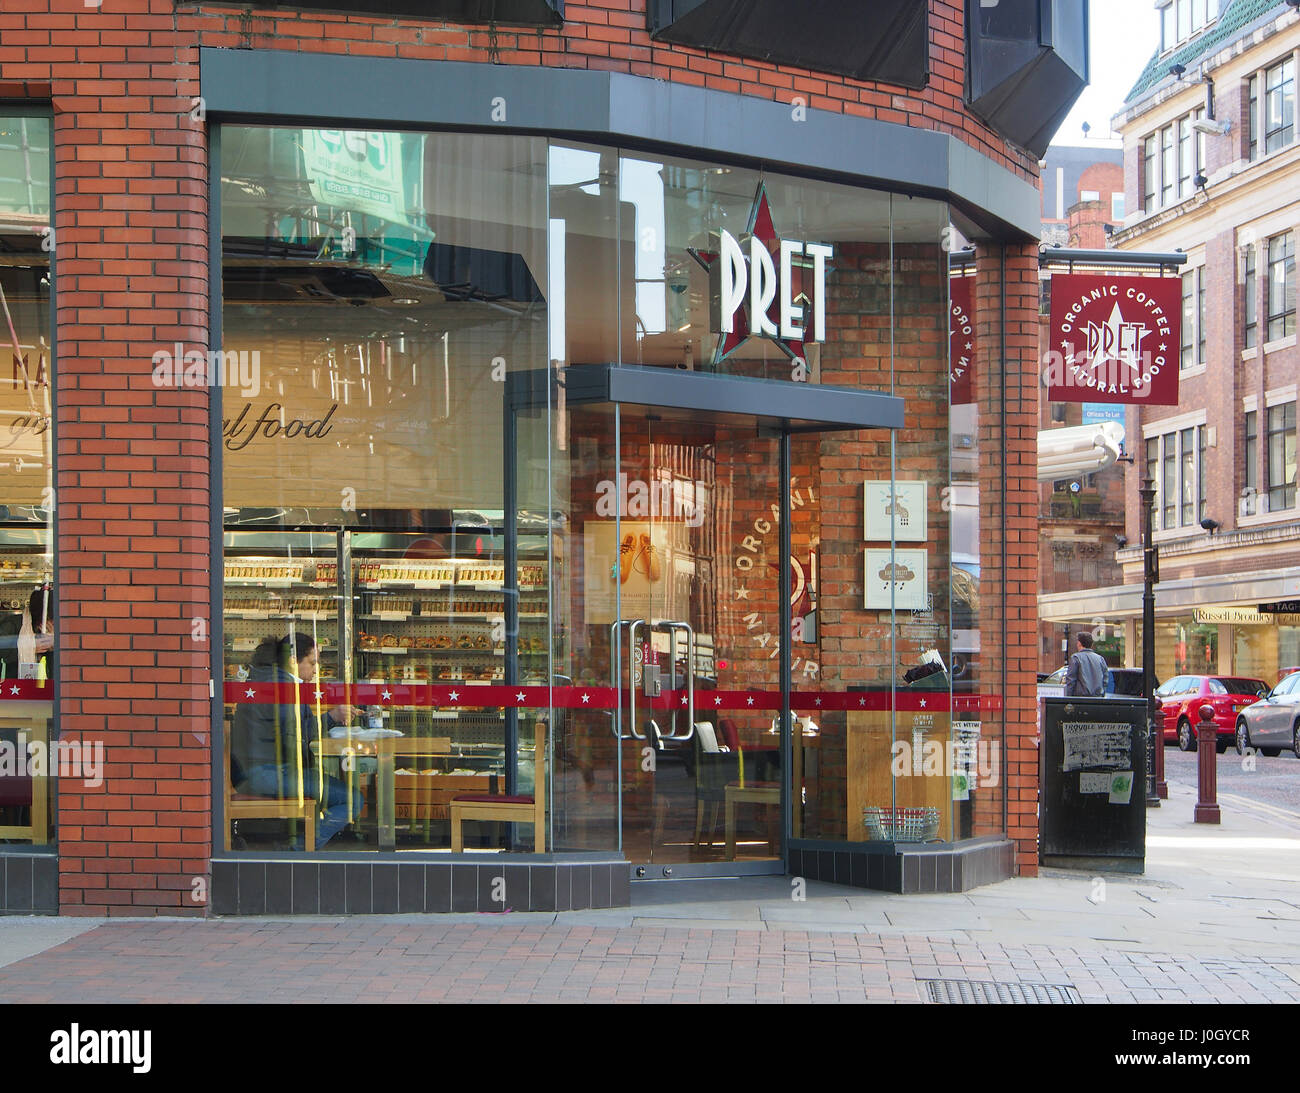 Exterior shot of the of the coffee shop cafe Pret a Manger, in the city centre of Manchester, showing the interior displays + customers drinking. Stock Photo